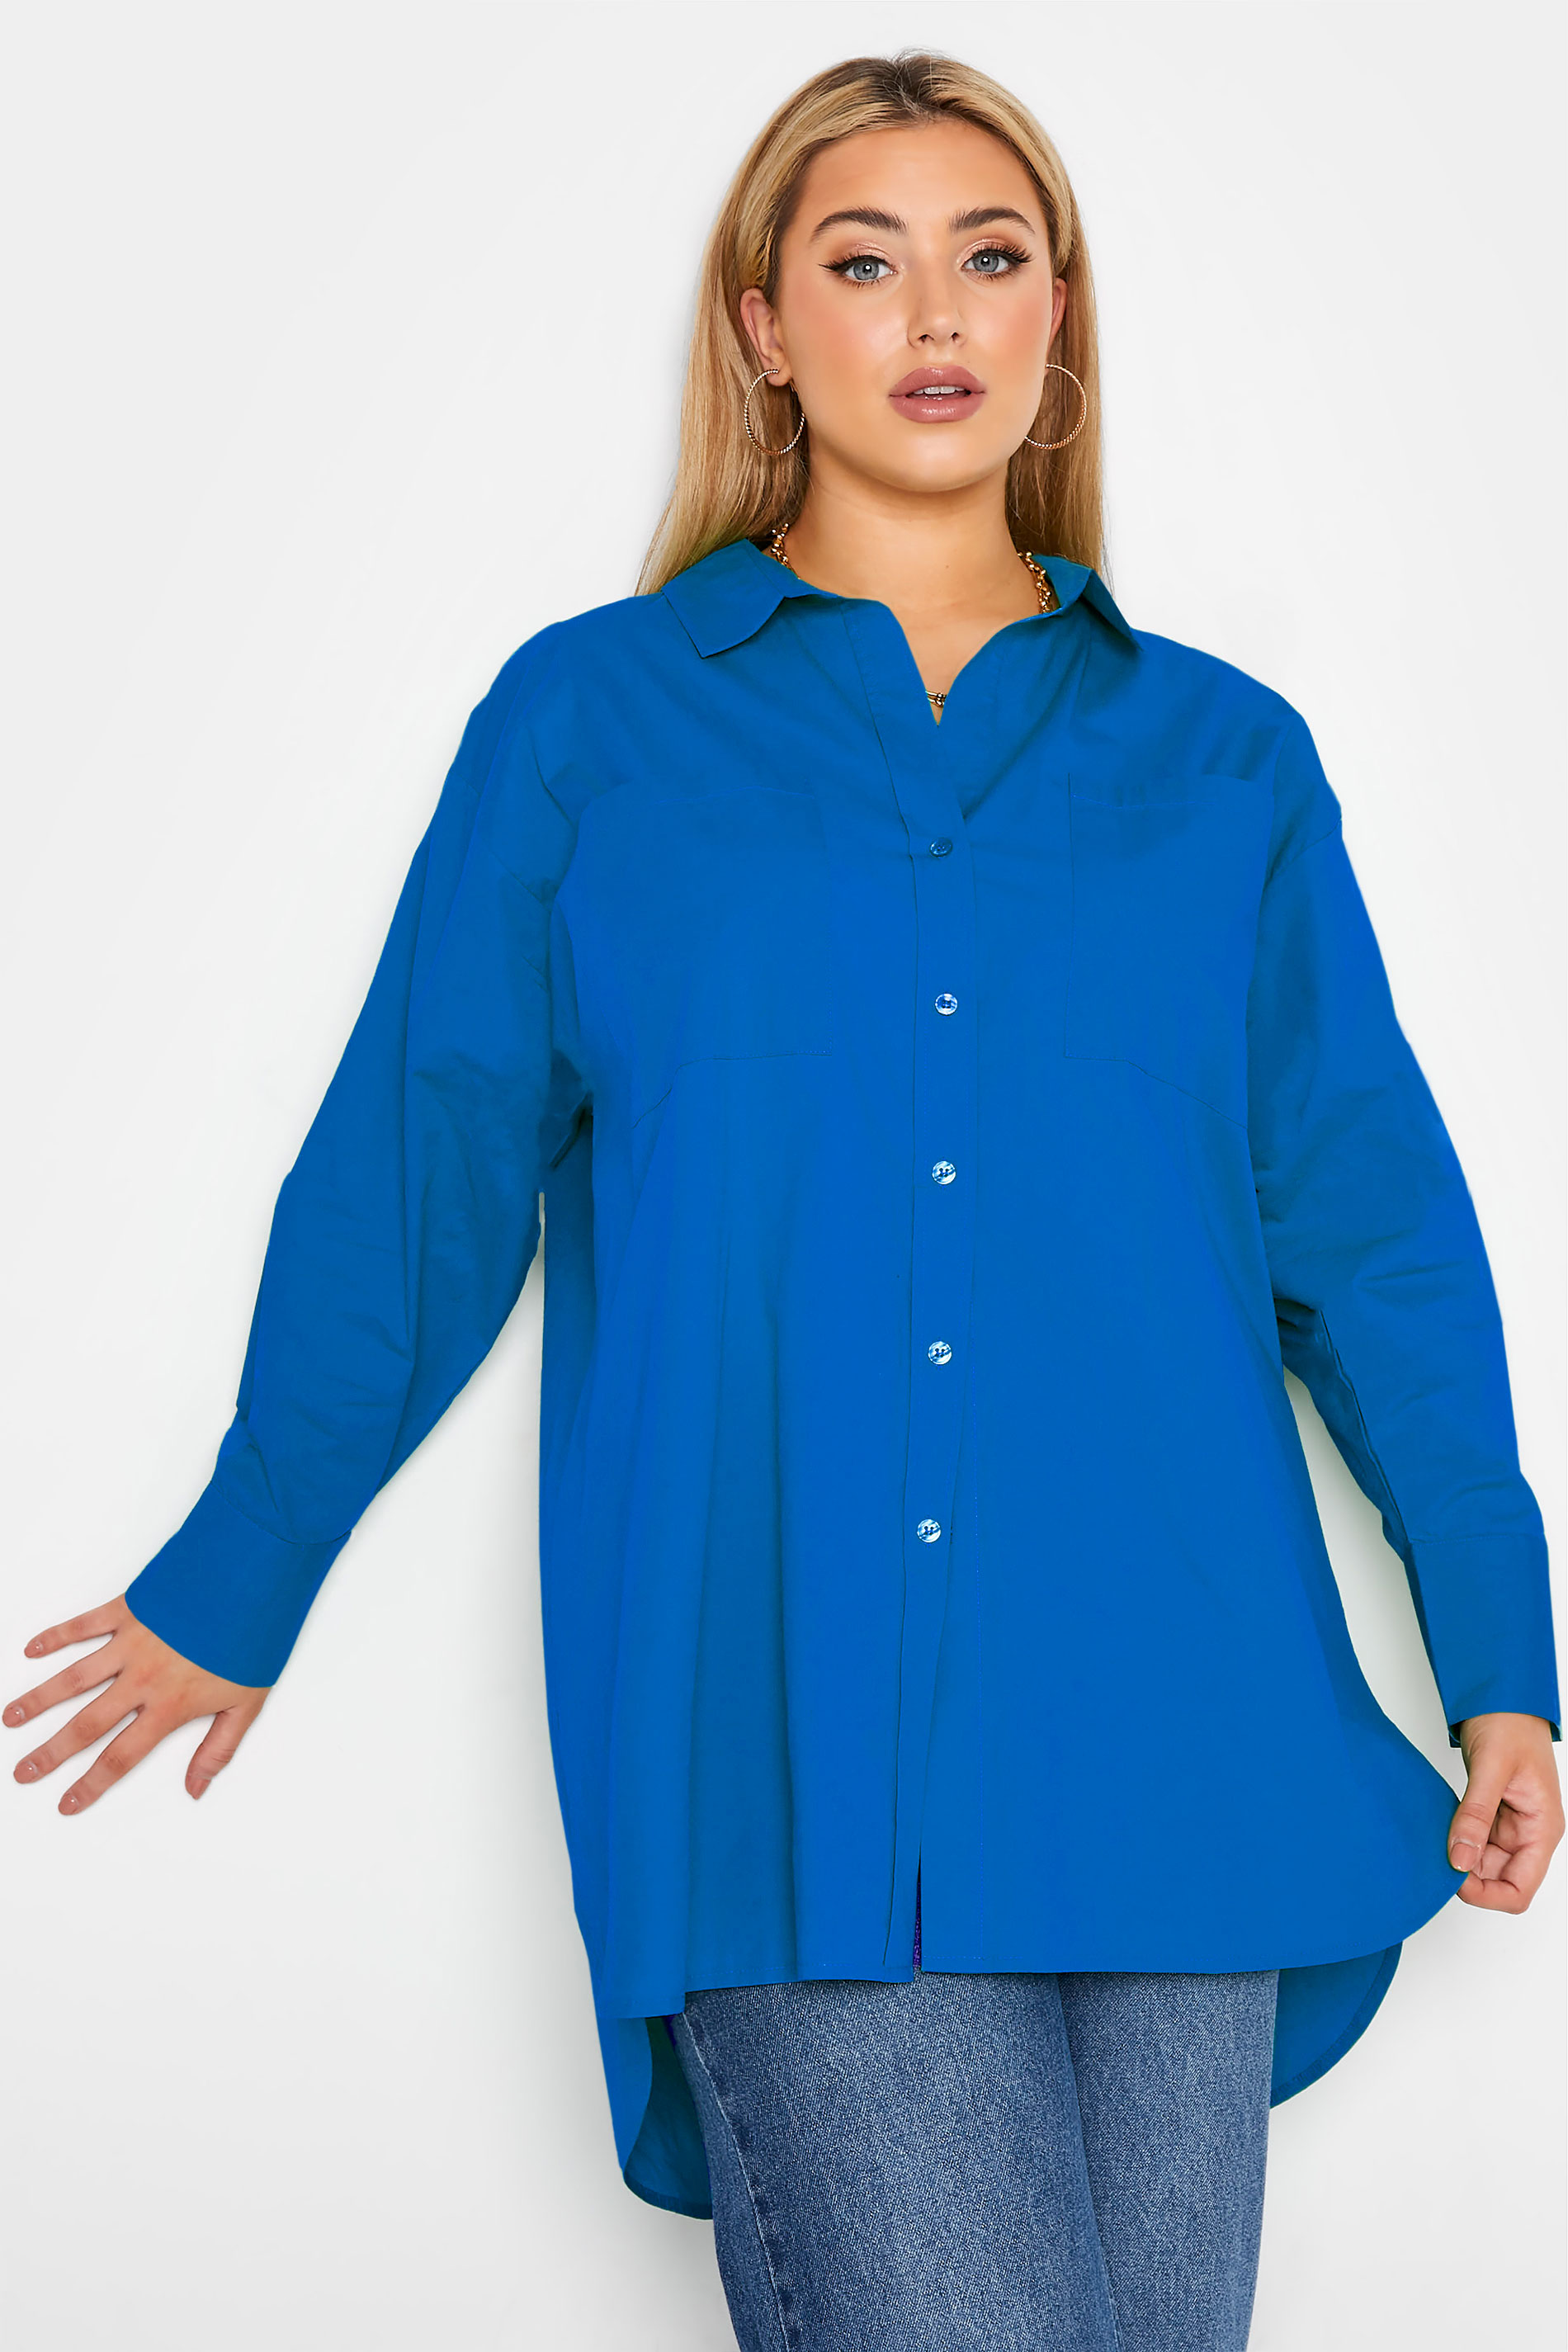 Grande taille  Blouses & Chemisiers Grande taille  Chemisiers | LIMITED COLLECTION - Chemisier Bleu Roi Oversize Boyfriend - NG68394